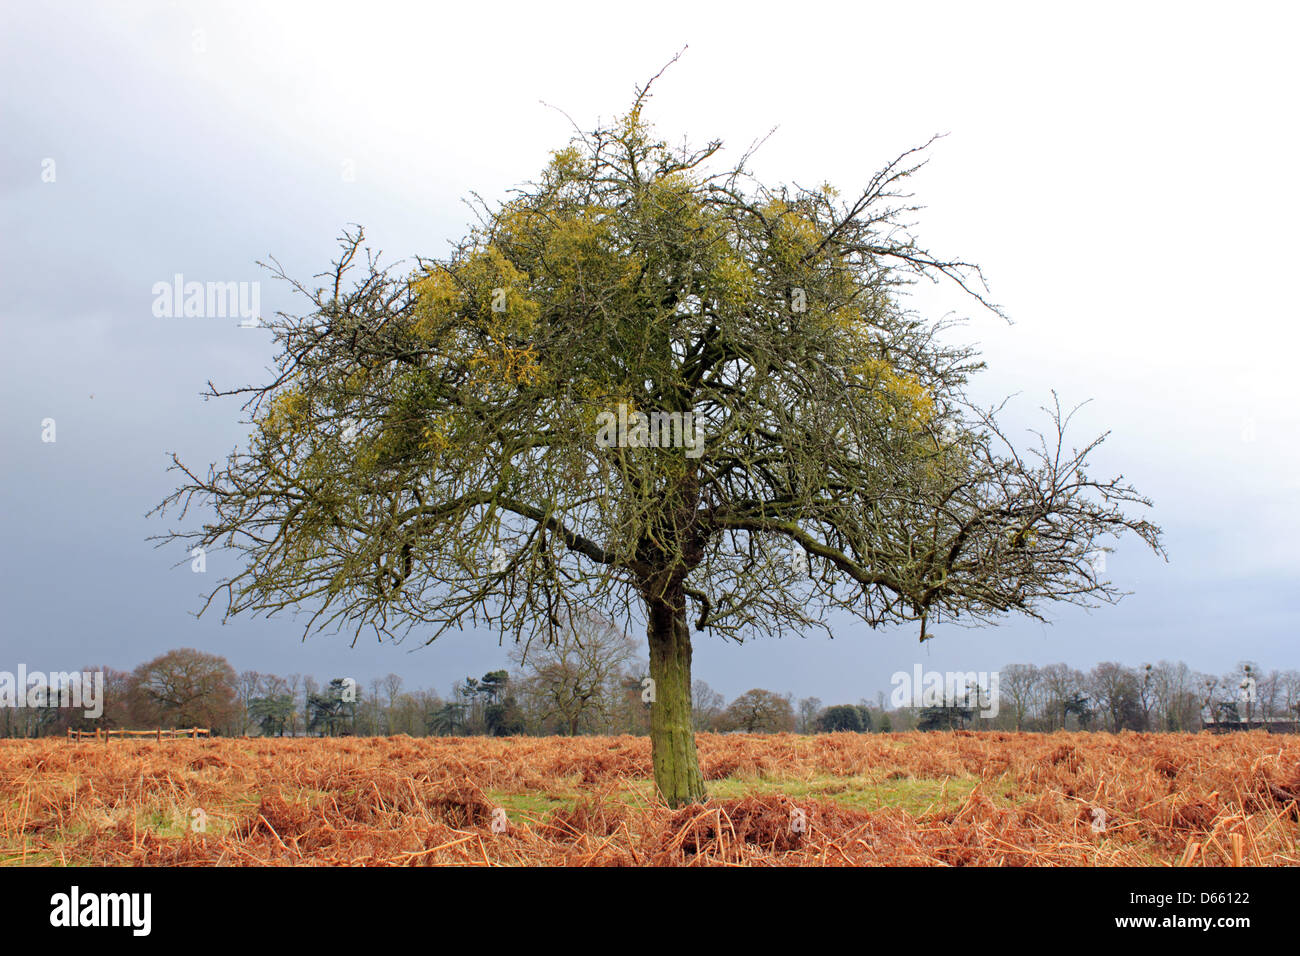 Bushy Park, SW London, England, UK.  12th April 2013. Stormy skies and heavy showers were the latest weather conditions in Southern England today. Credit: Julia Gavin / Alamy Live News Stock Photo